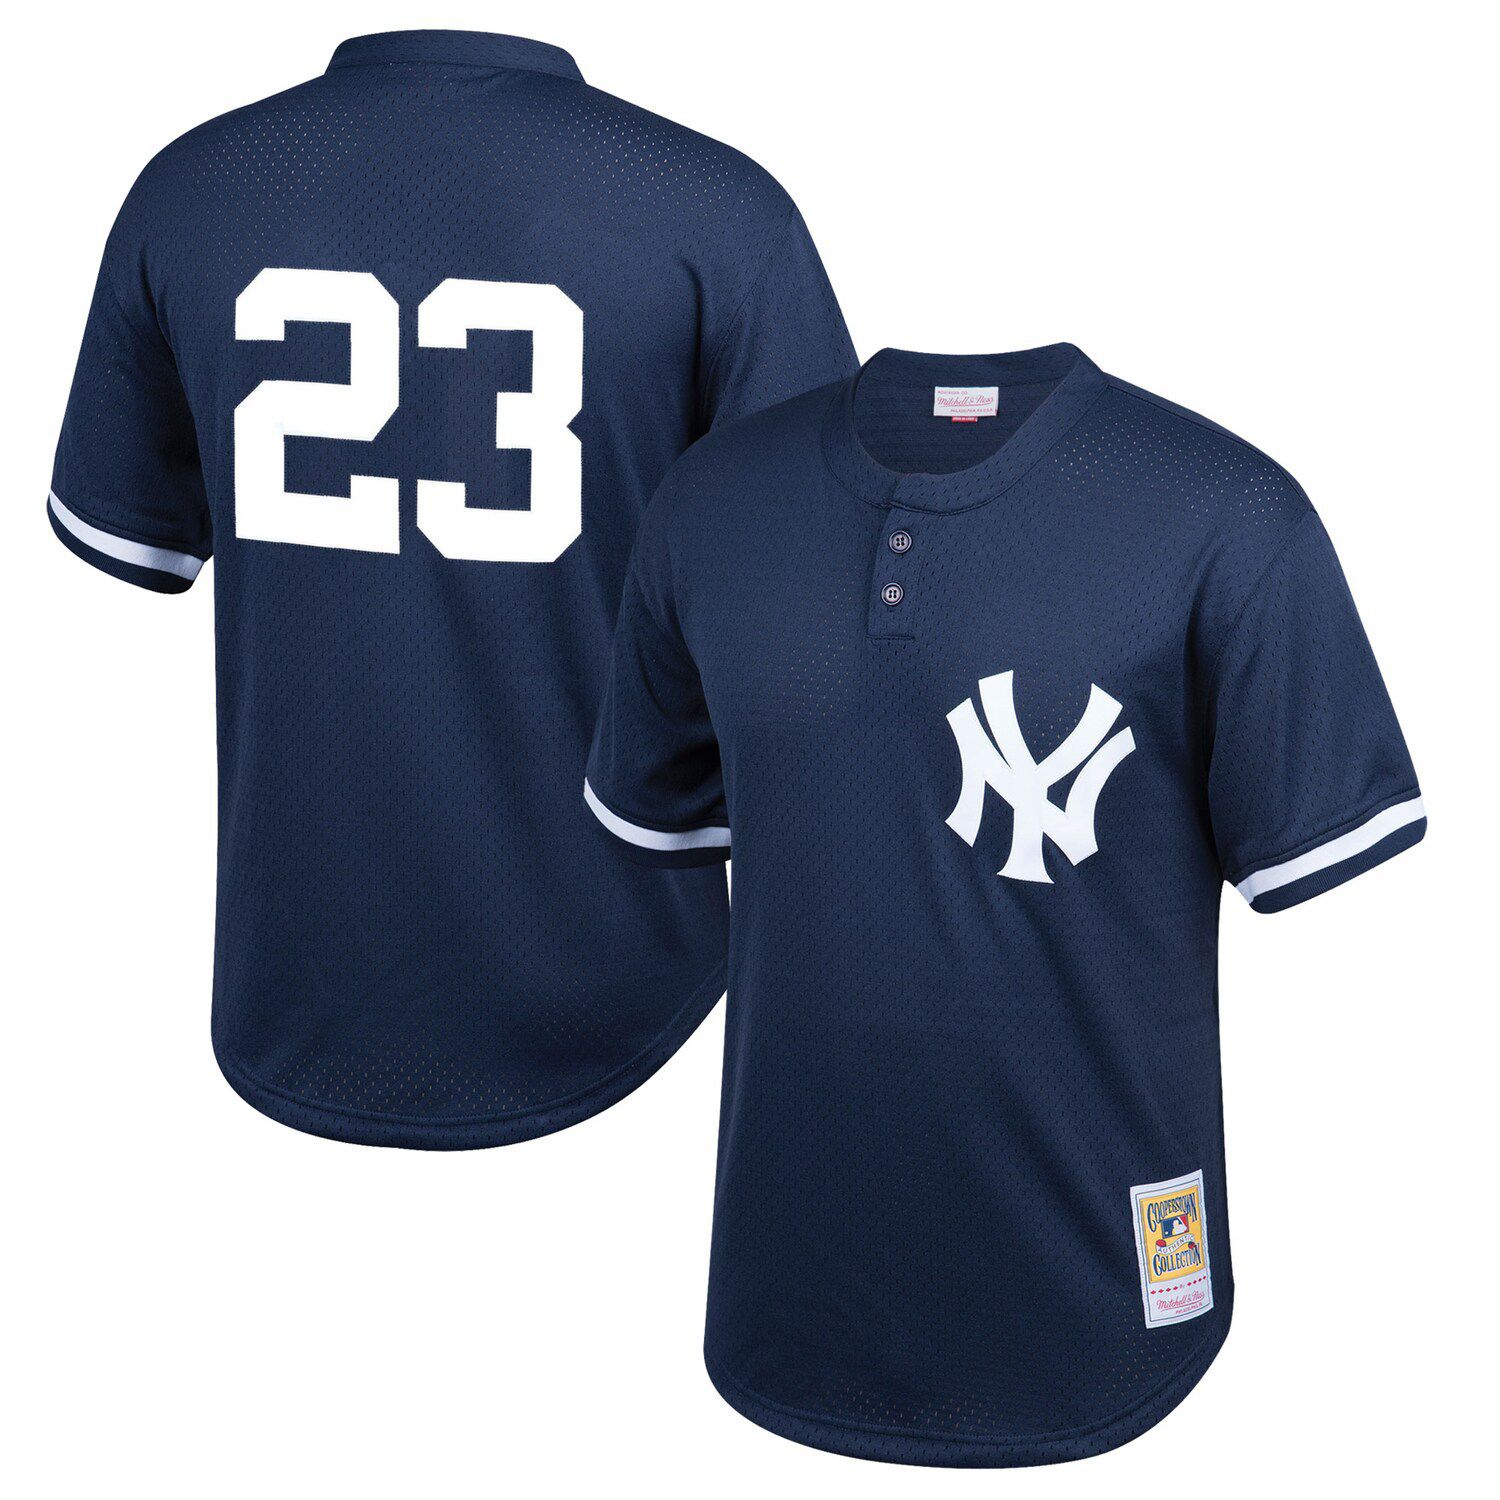 Image for Unbranded Youth Mitchell & Ness Don Mattingly Navy New York Yankees Cooperstown Collection Mesh Batting Practice Jersey at Kohl's.